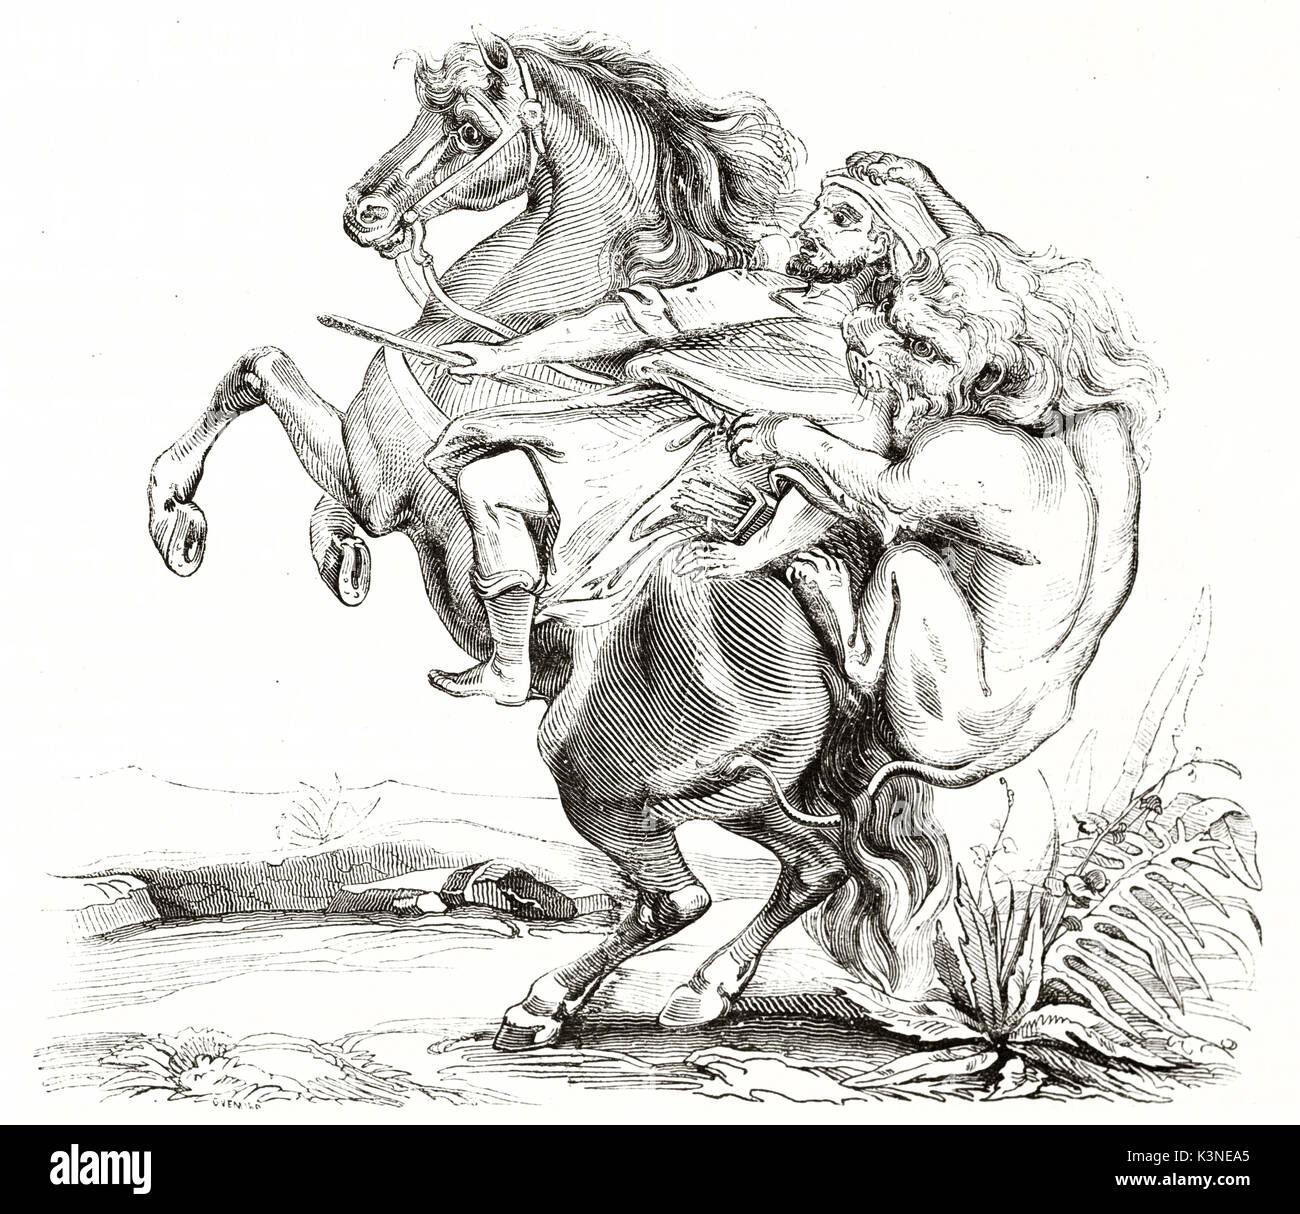 Cruel Lion attacks his hunter on his backs like an ambush making his horse rearing up scared. Ancient detailed illustration by unidentified author published on Magasin Pittoresque Paris 1839 Stock Photo